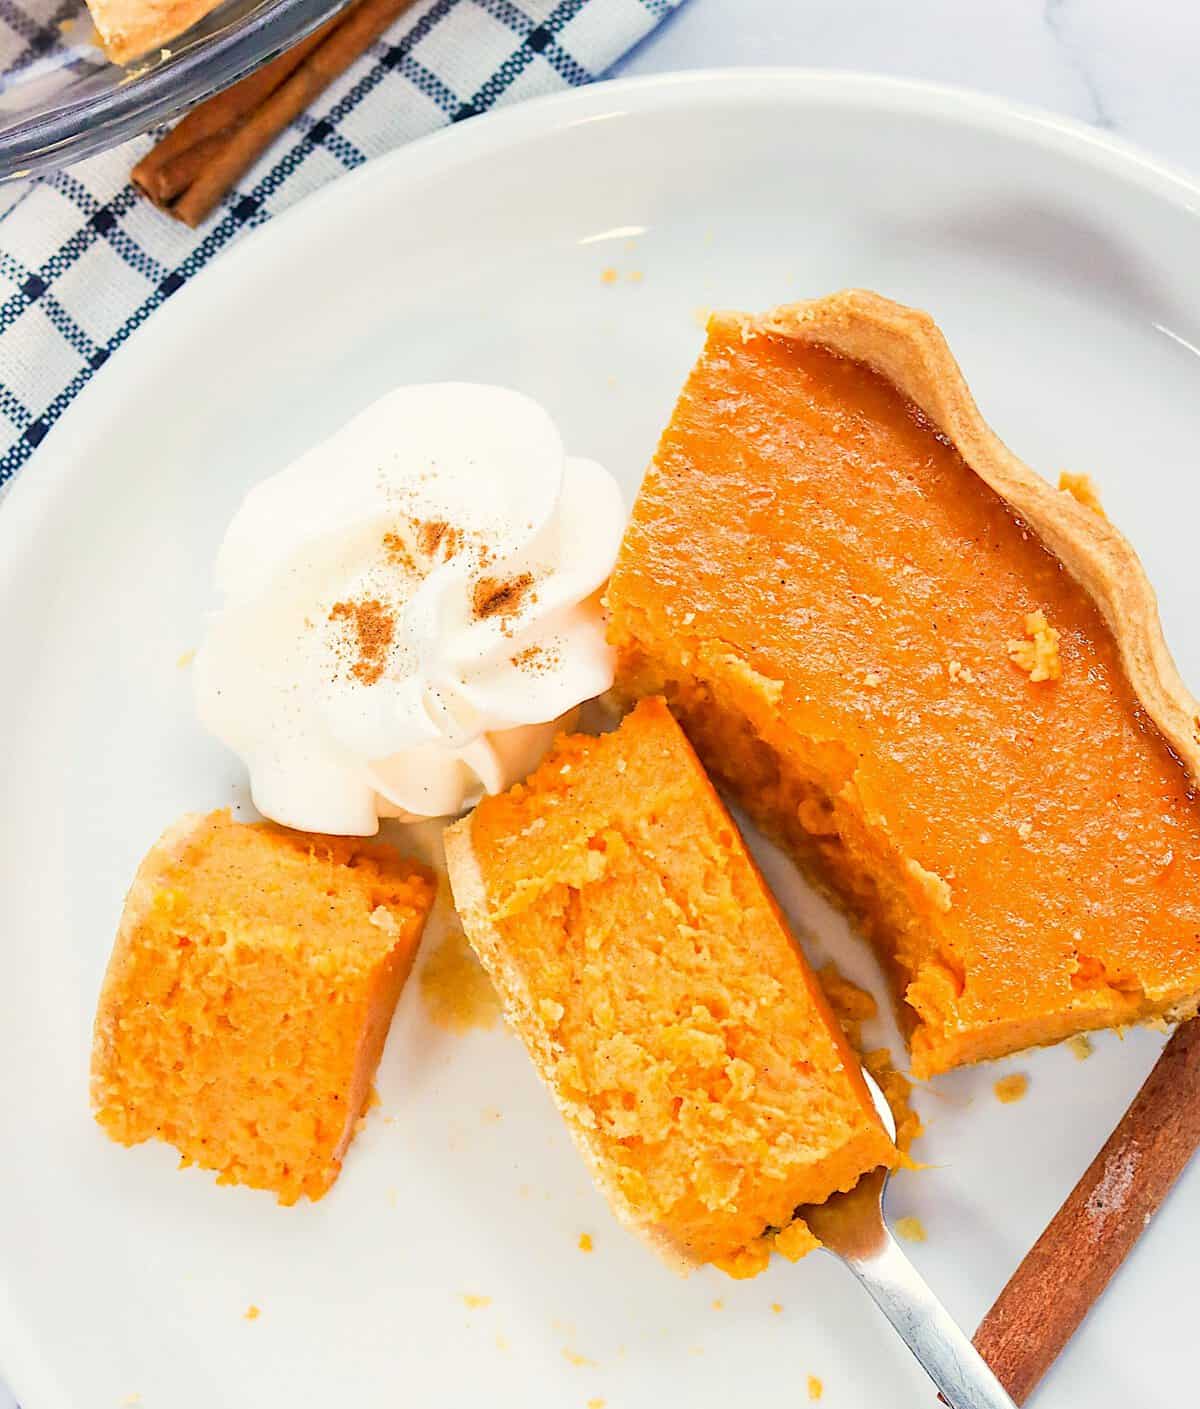 Diving into insanely silky Condensed Milk Sweet Potato Pie with homemade whipped cream